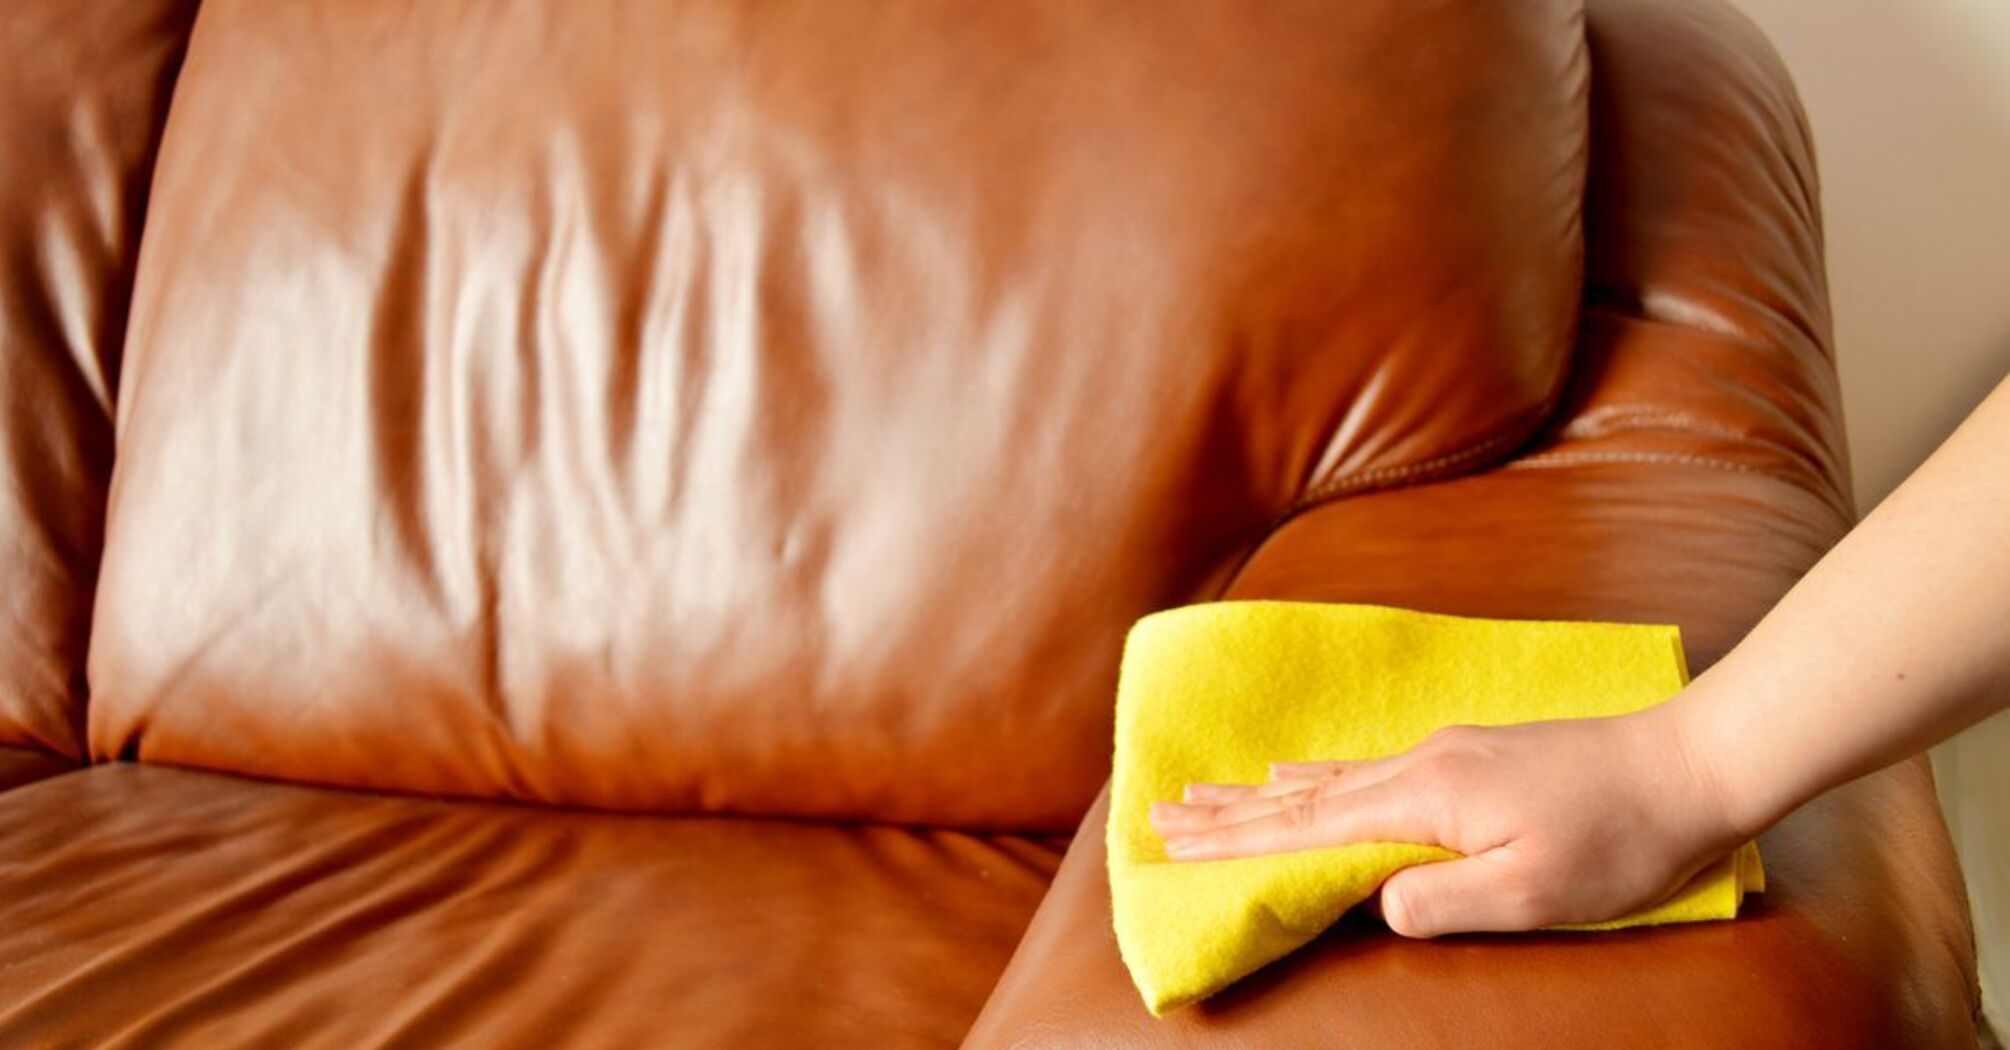 How to effectively clean a leather sofa from stains